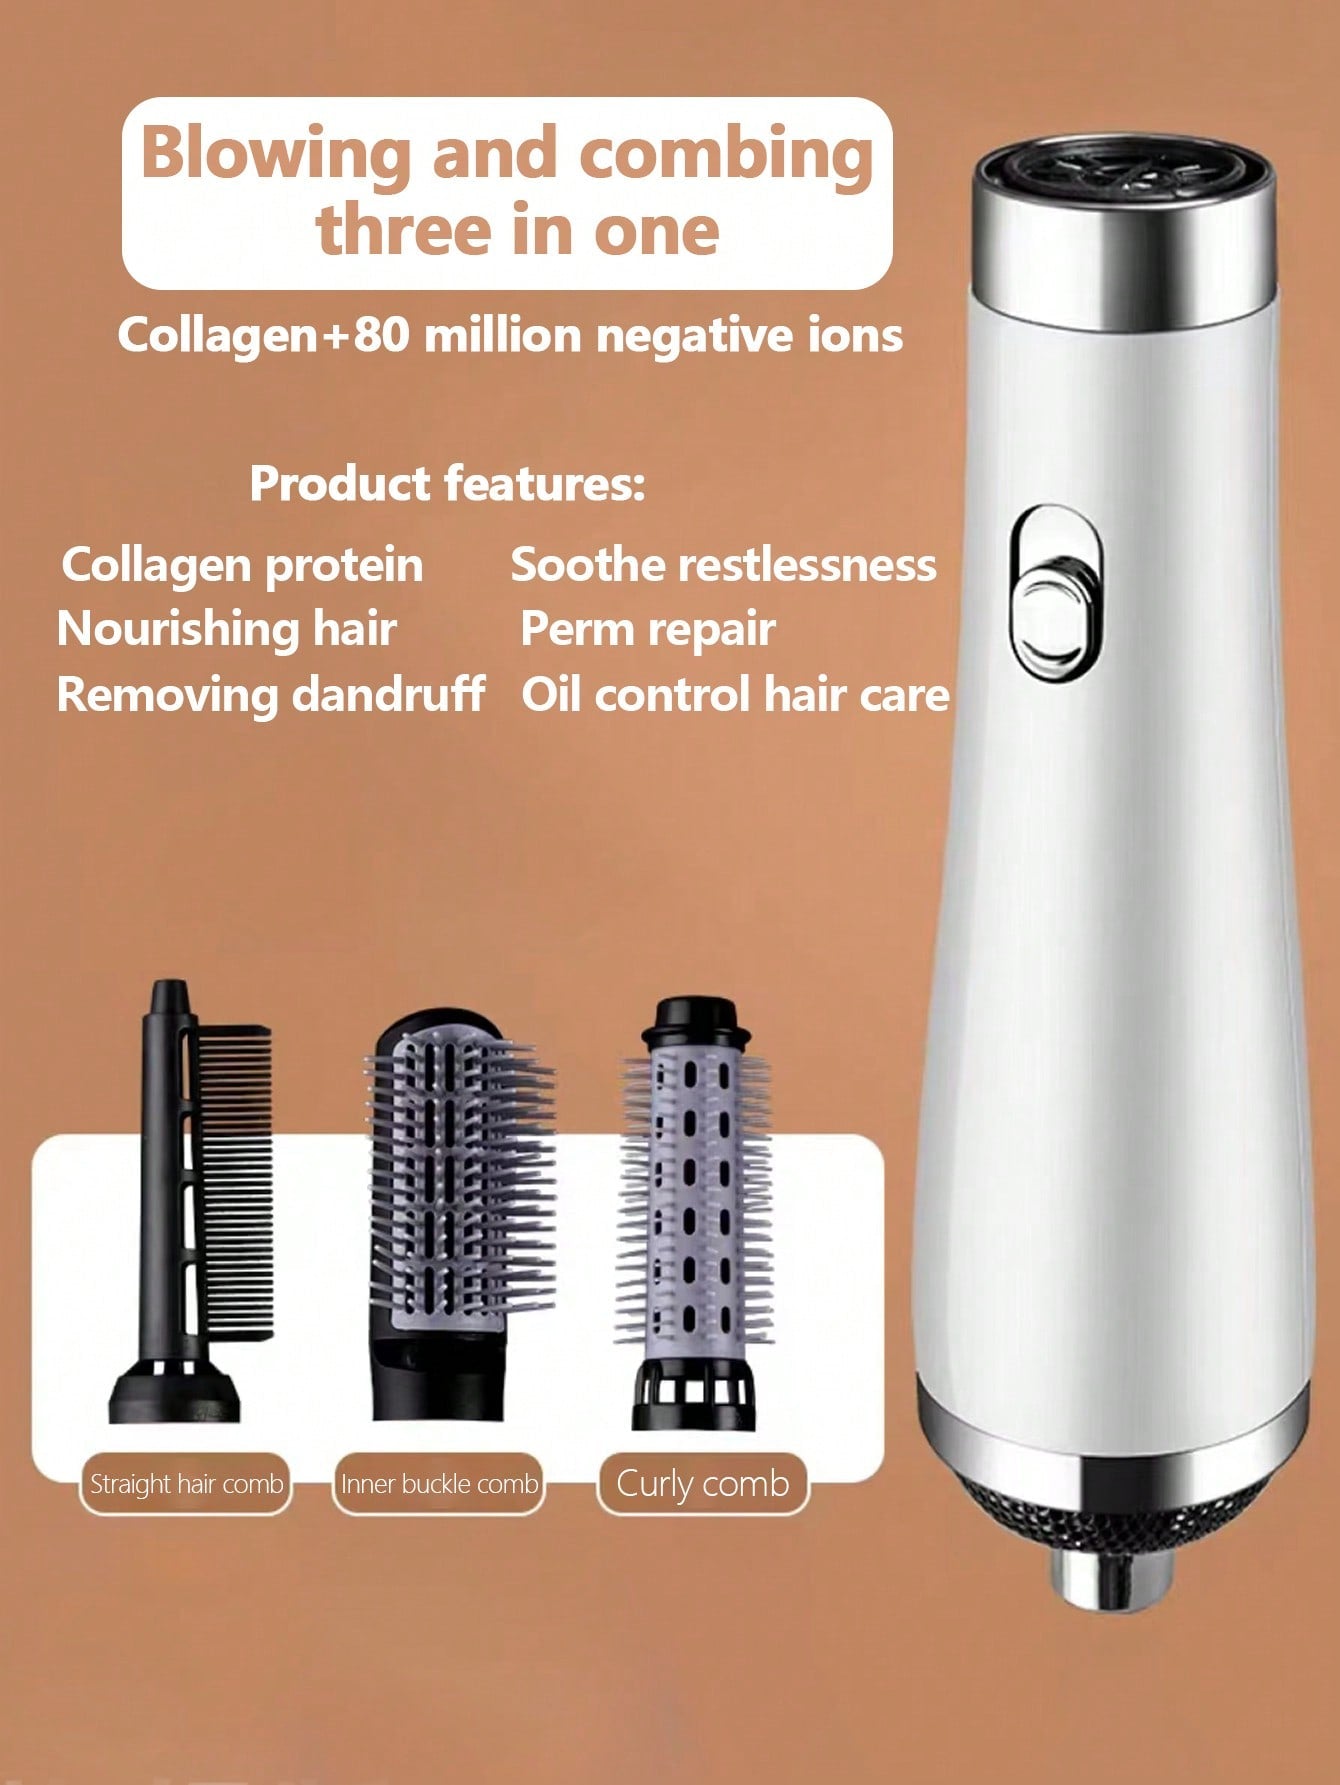 1 Handheld Hair Dryer Hot Air Comb 8899, Handheld Hot Air Comb, Suitable For Home Use In Hair Styling--2